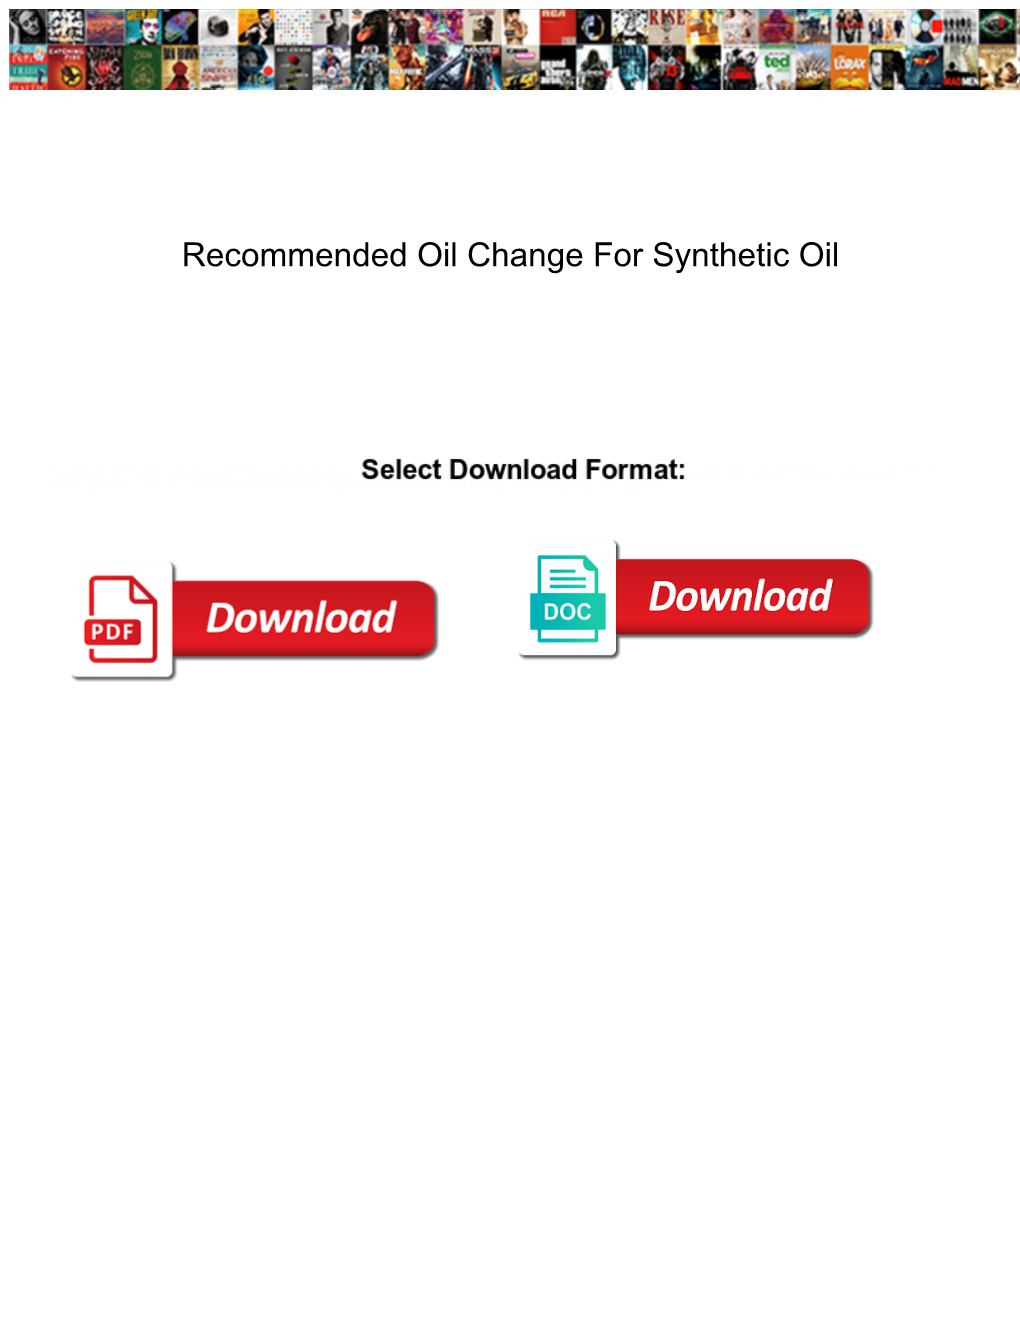 Recommended Oil Change for Synthetic Oil